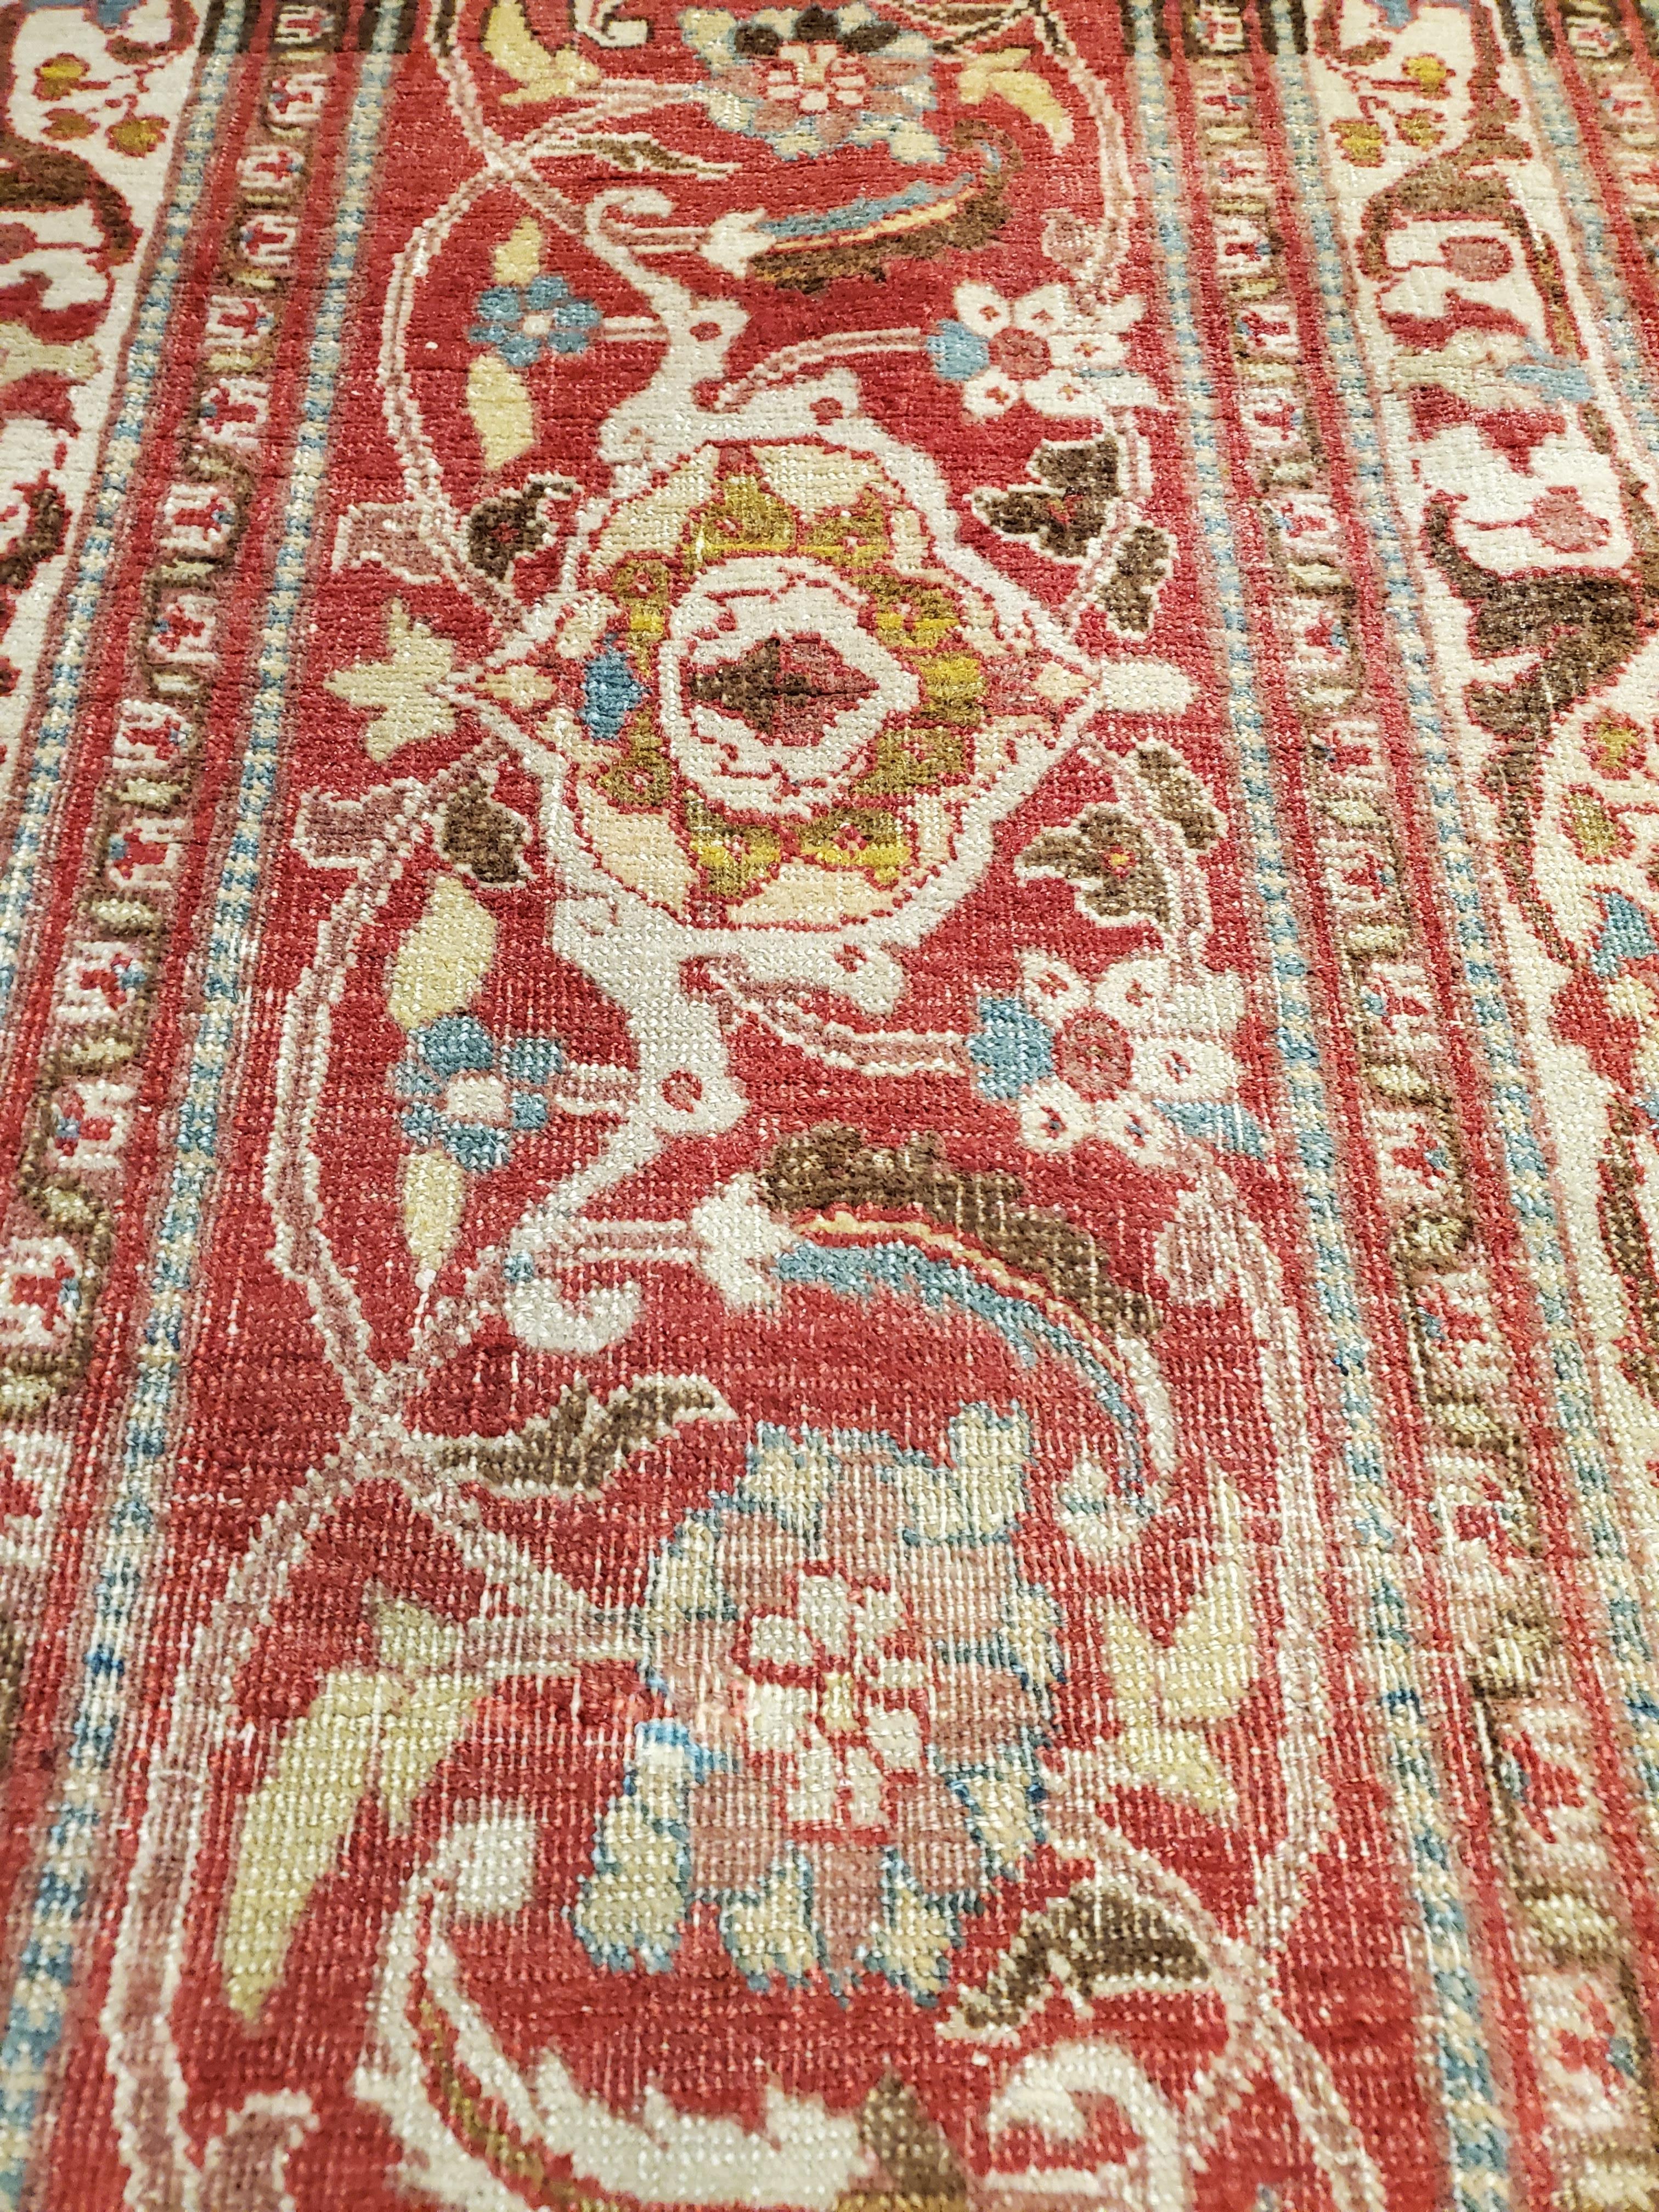 Antique Tabriz Carpet, Handmade Persian Rug in Floral Gold, Red and Beige For Sale 4